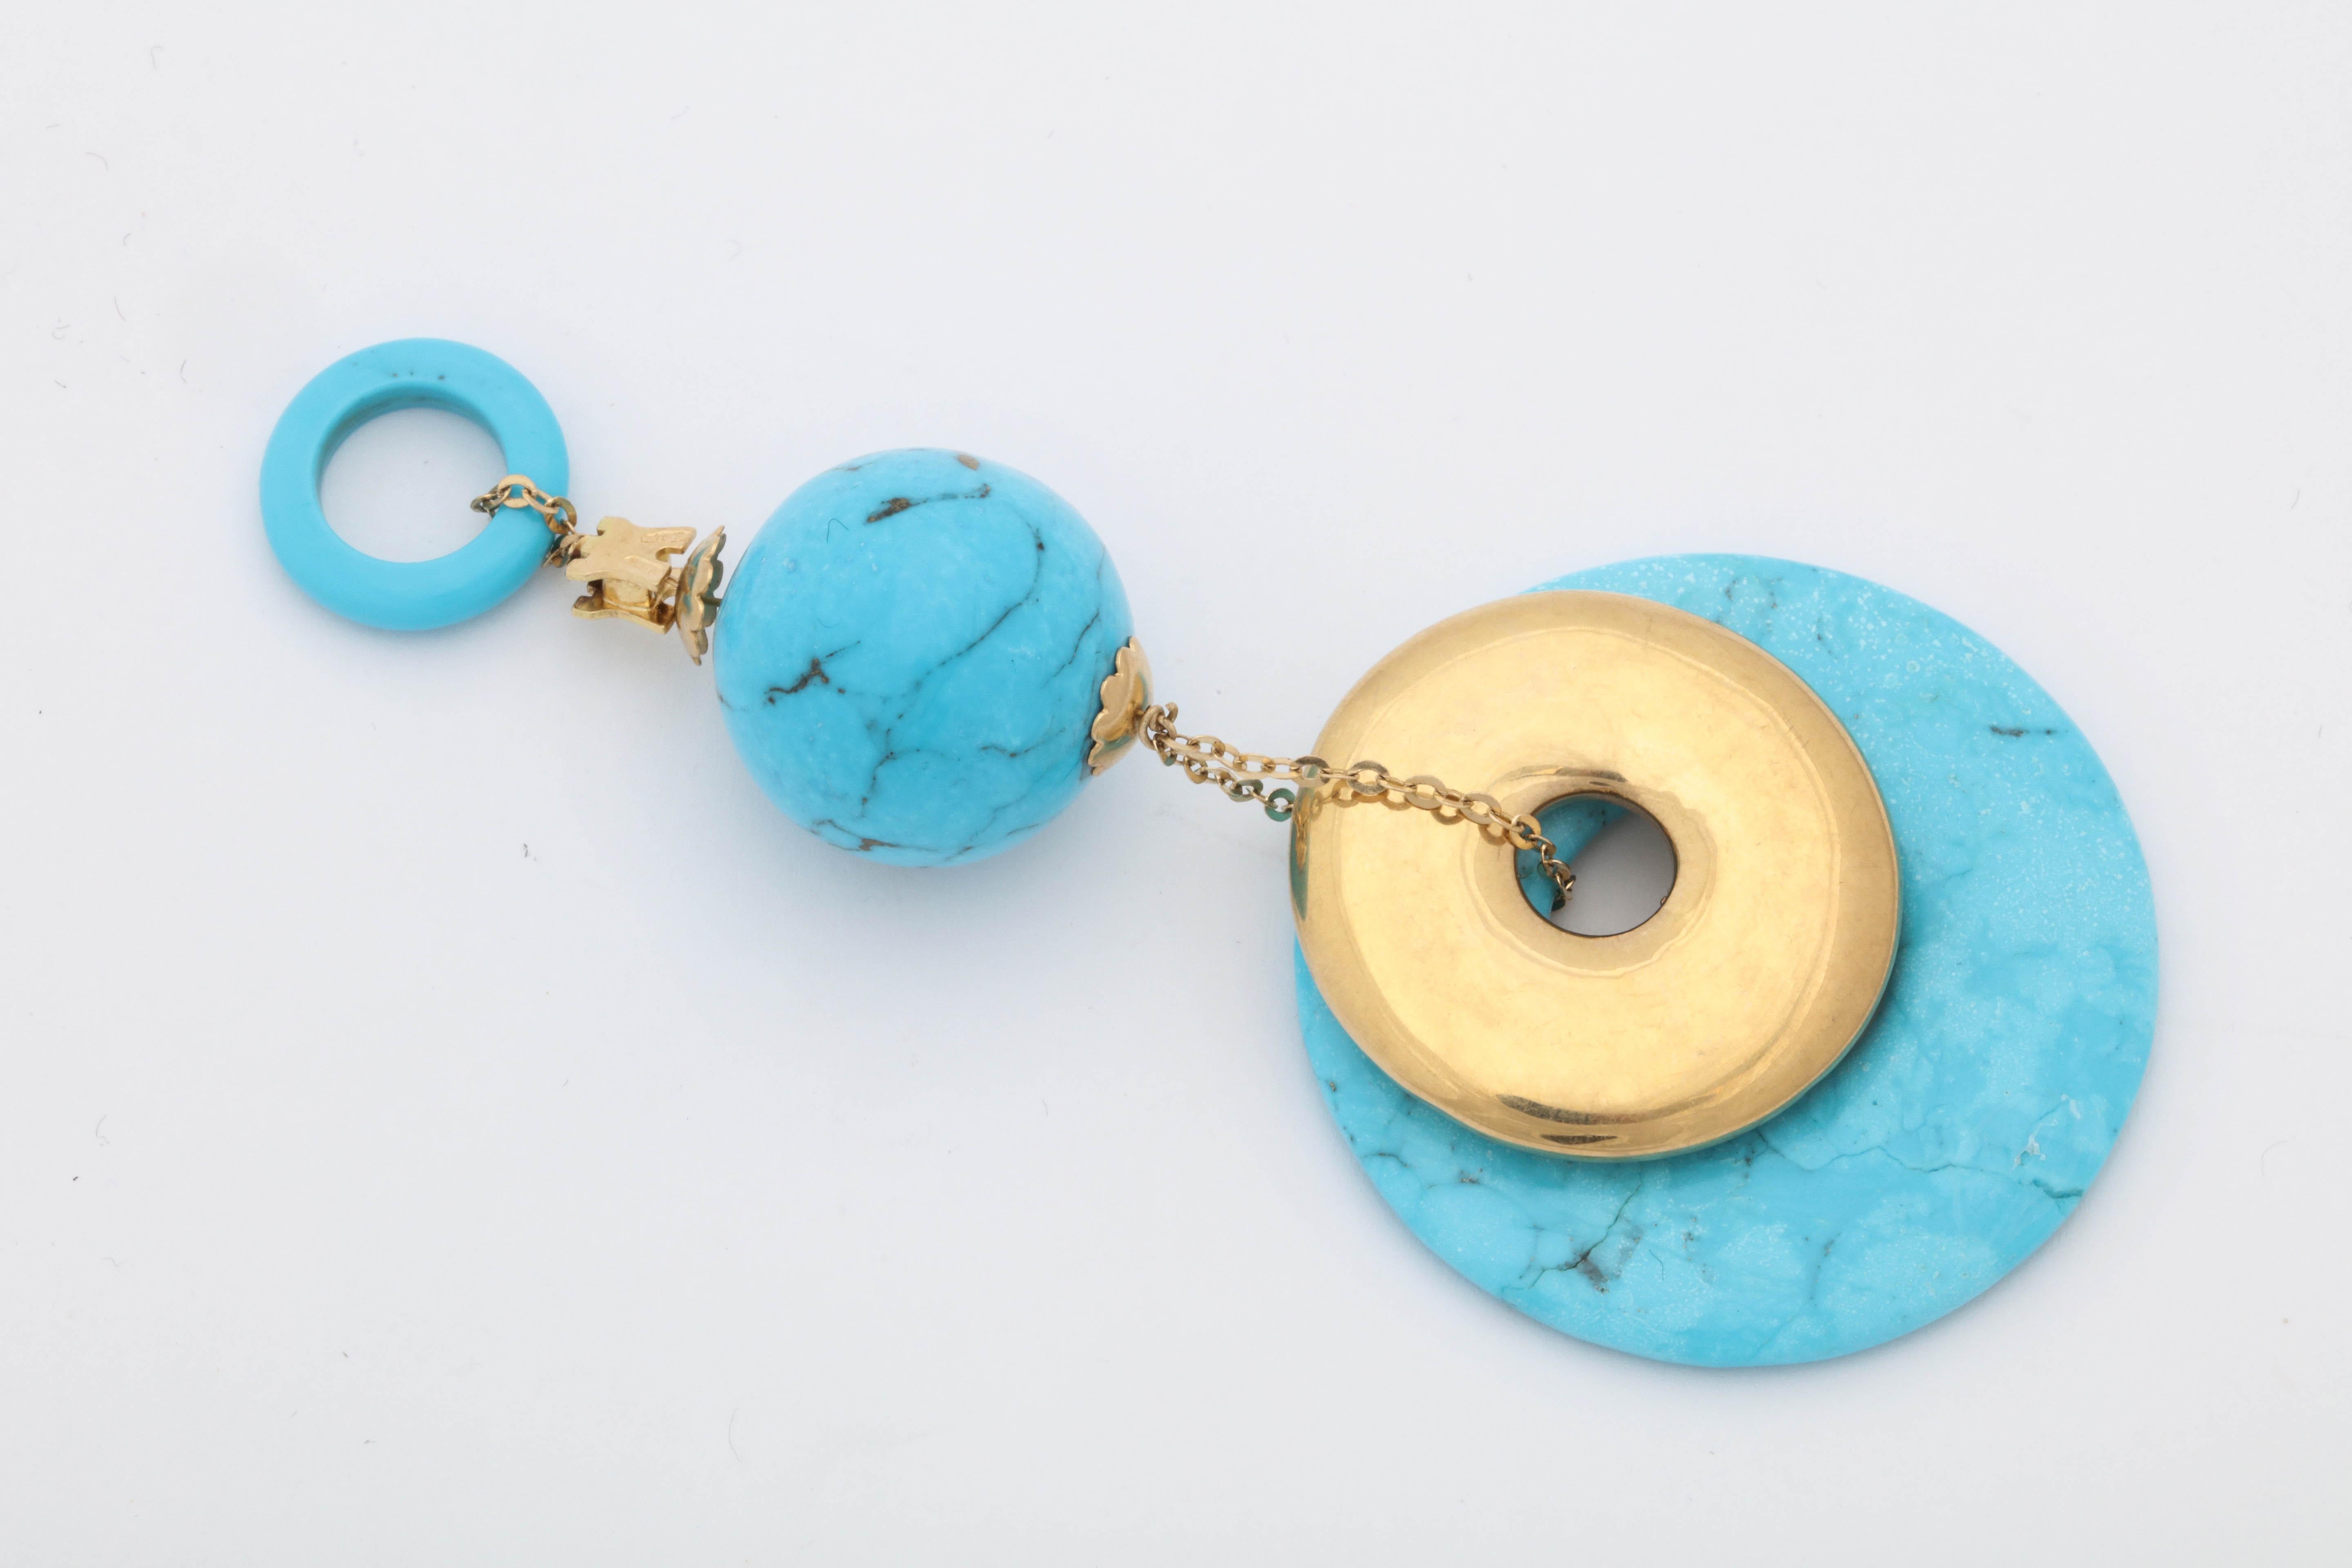 One 18kt Yellow Gold Geometric Double Disc Pendant Necklace Created By Rajola Jewelers Italy. Fabulous 60's Look Created In The 1980's. Very Geometric Design in Natural Turquoise Pieces.